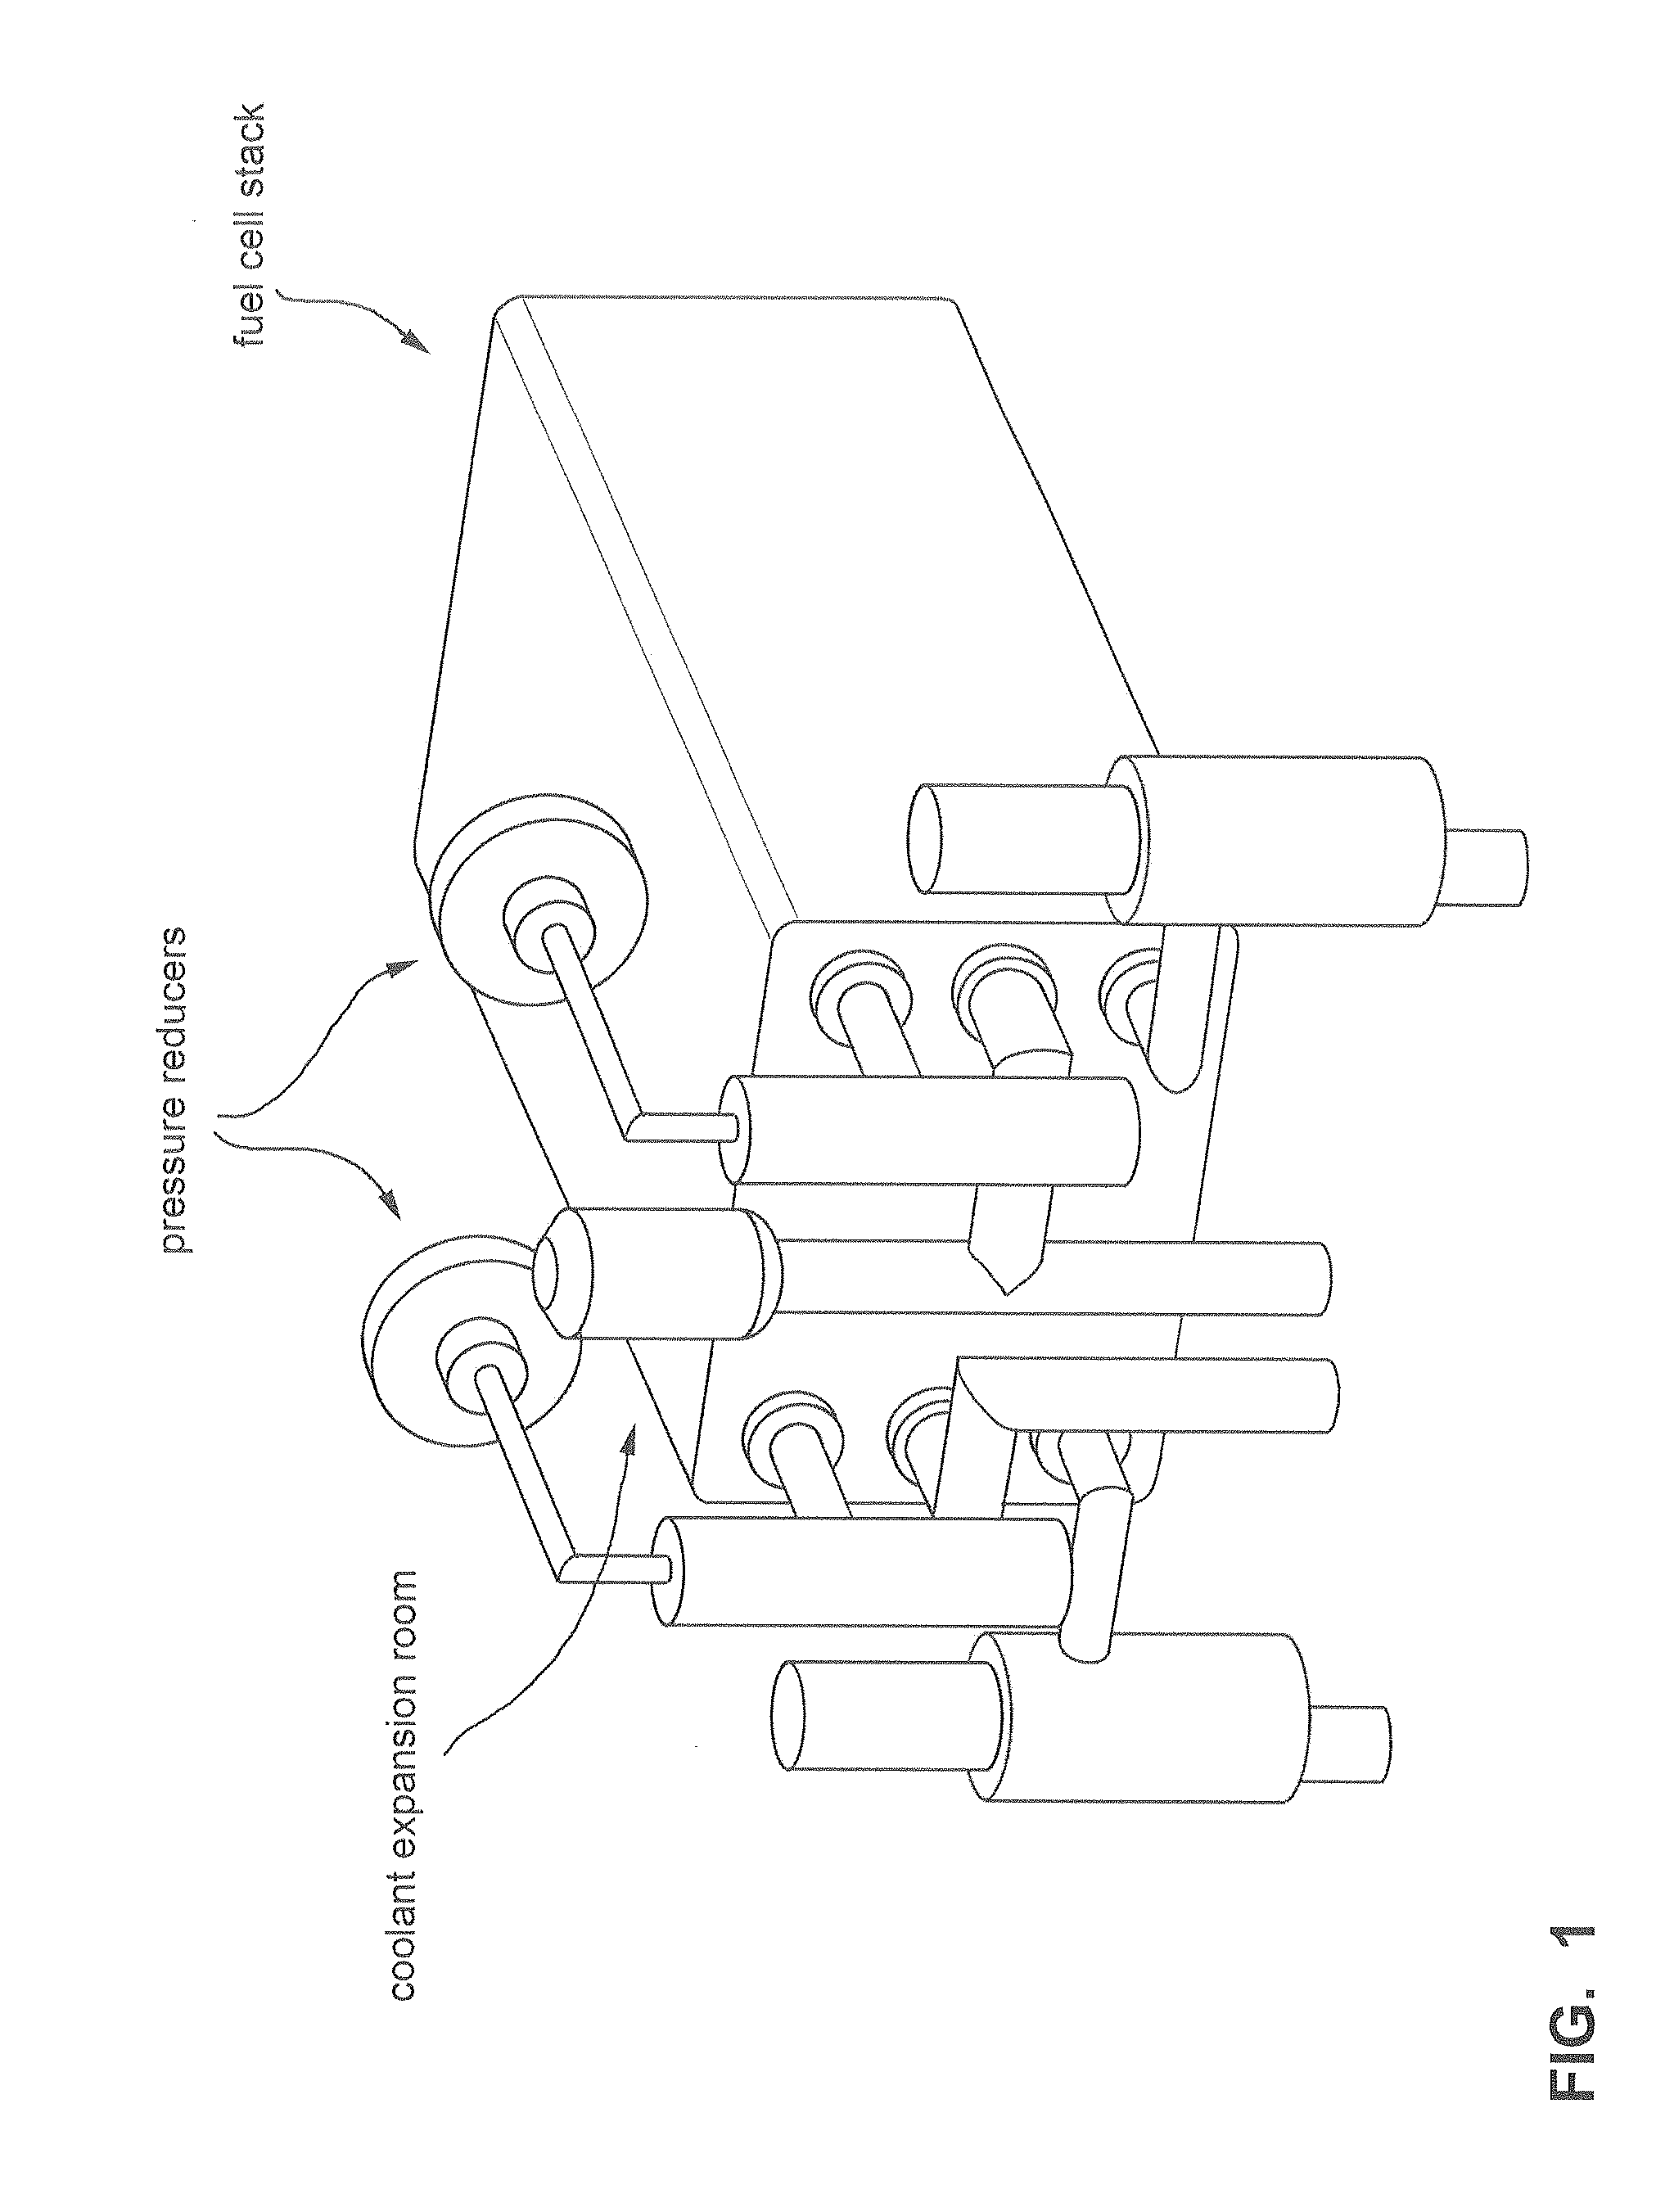 Back-up fuel cell electric generator comprising a compact manifold body, and methods of managing the operation thereof